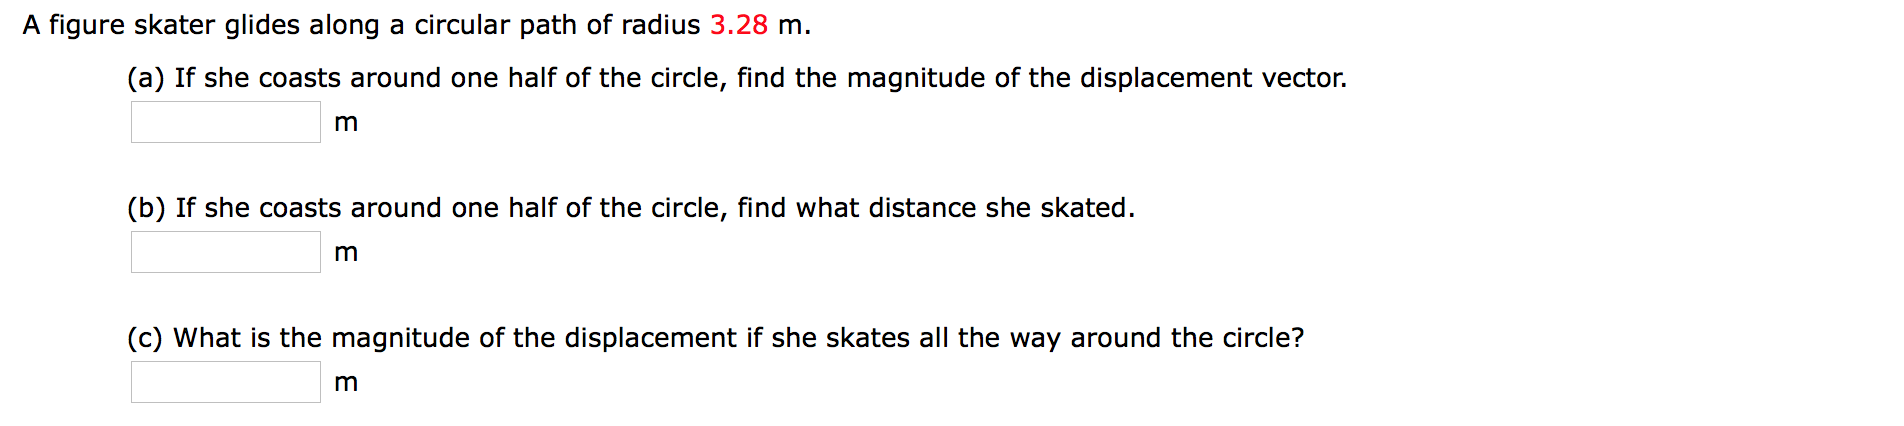 A figure skater glides along a circular path of radius 3.28 m.
(a) If she coasts around one half of the circle, find the magnitude of the displacement vector.
m
(b) If she coasts around one half of the circle, find what distance she skated
m
(c) What is the magnitude of the displacement if she skates all the way around the circle?
m
